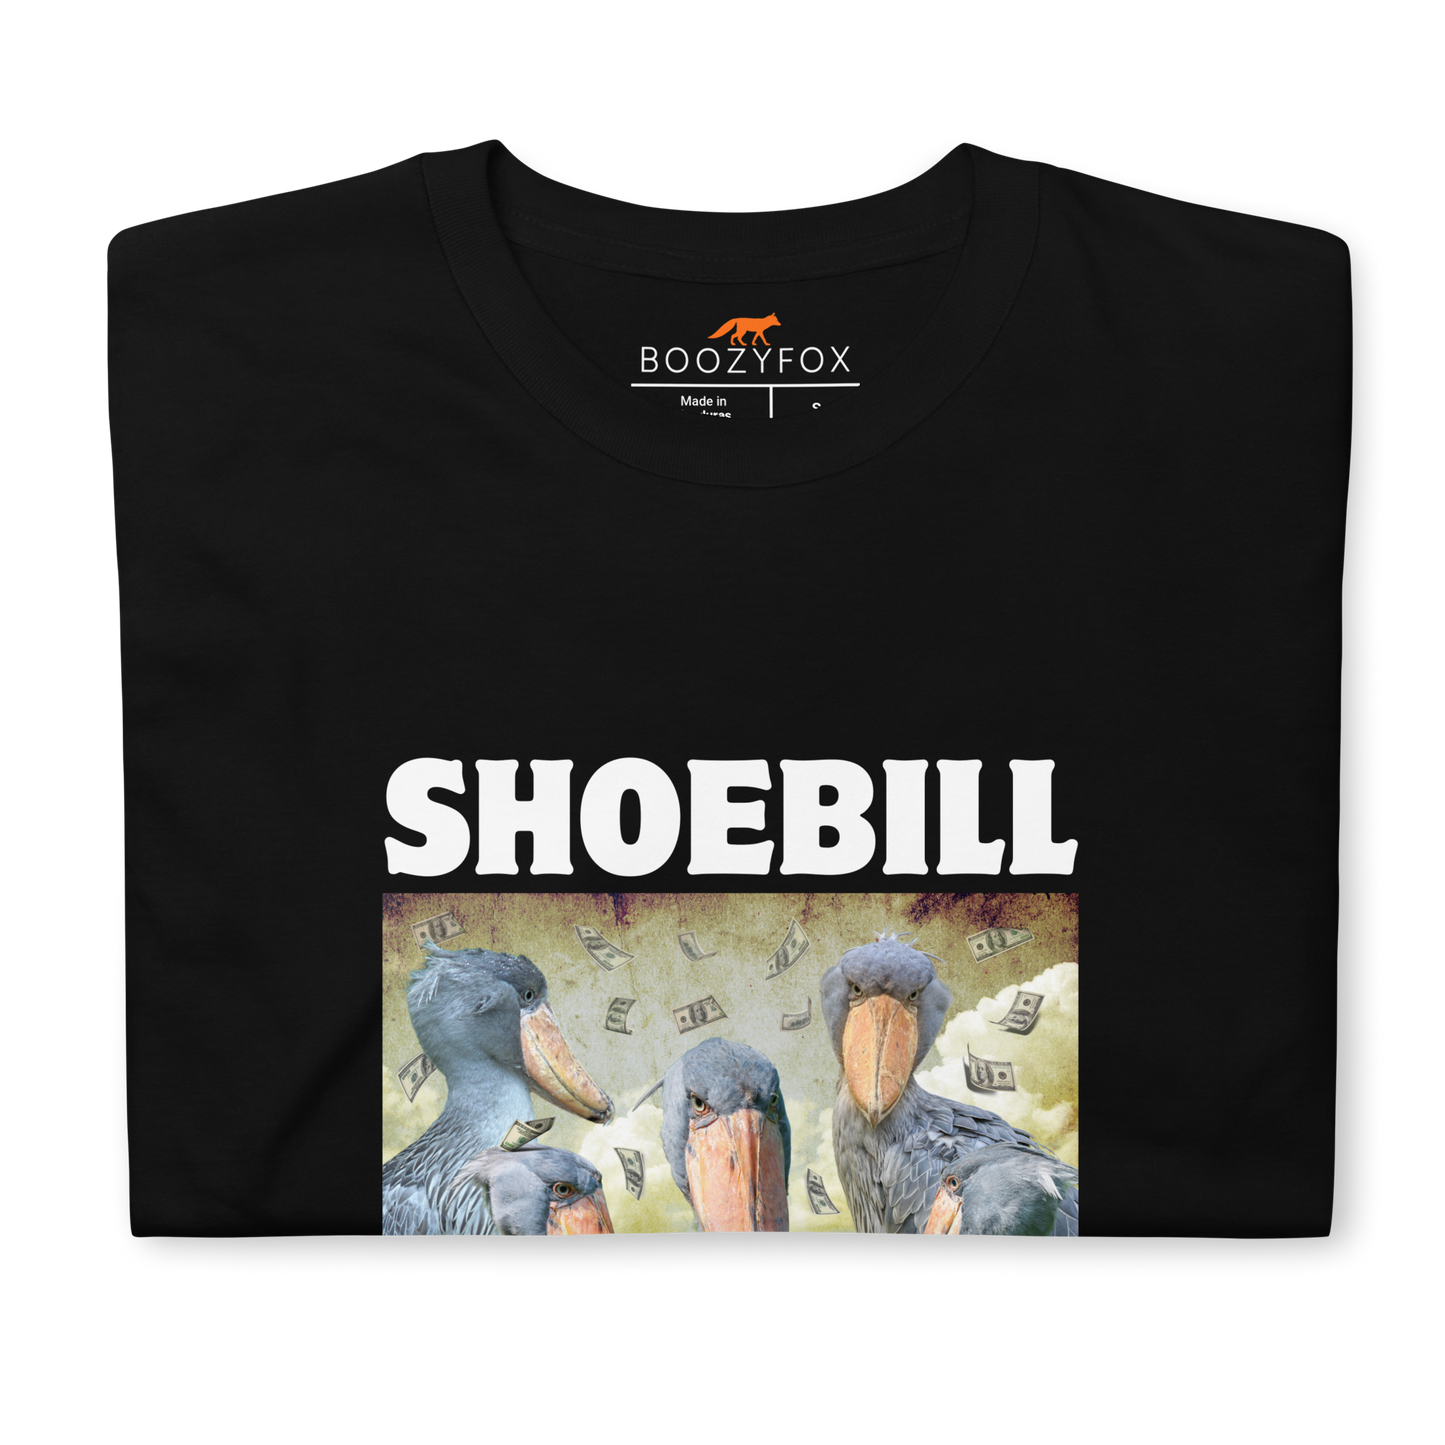 Front details of a Black Shoebill T-Shirt featuring a cool Shoebill graphic on the chest - Artsy/Funny Graphic Shoebill Stork T-Shirts - Boozy Fox